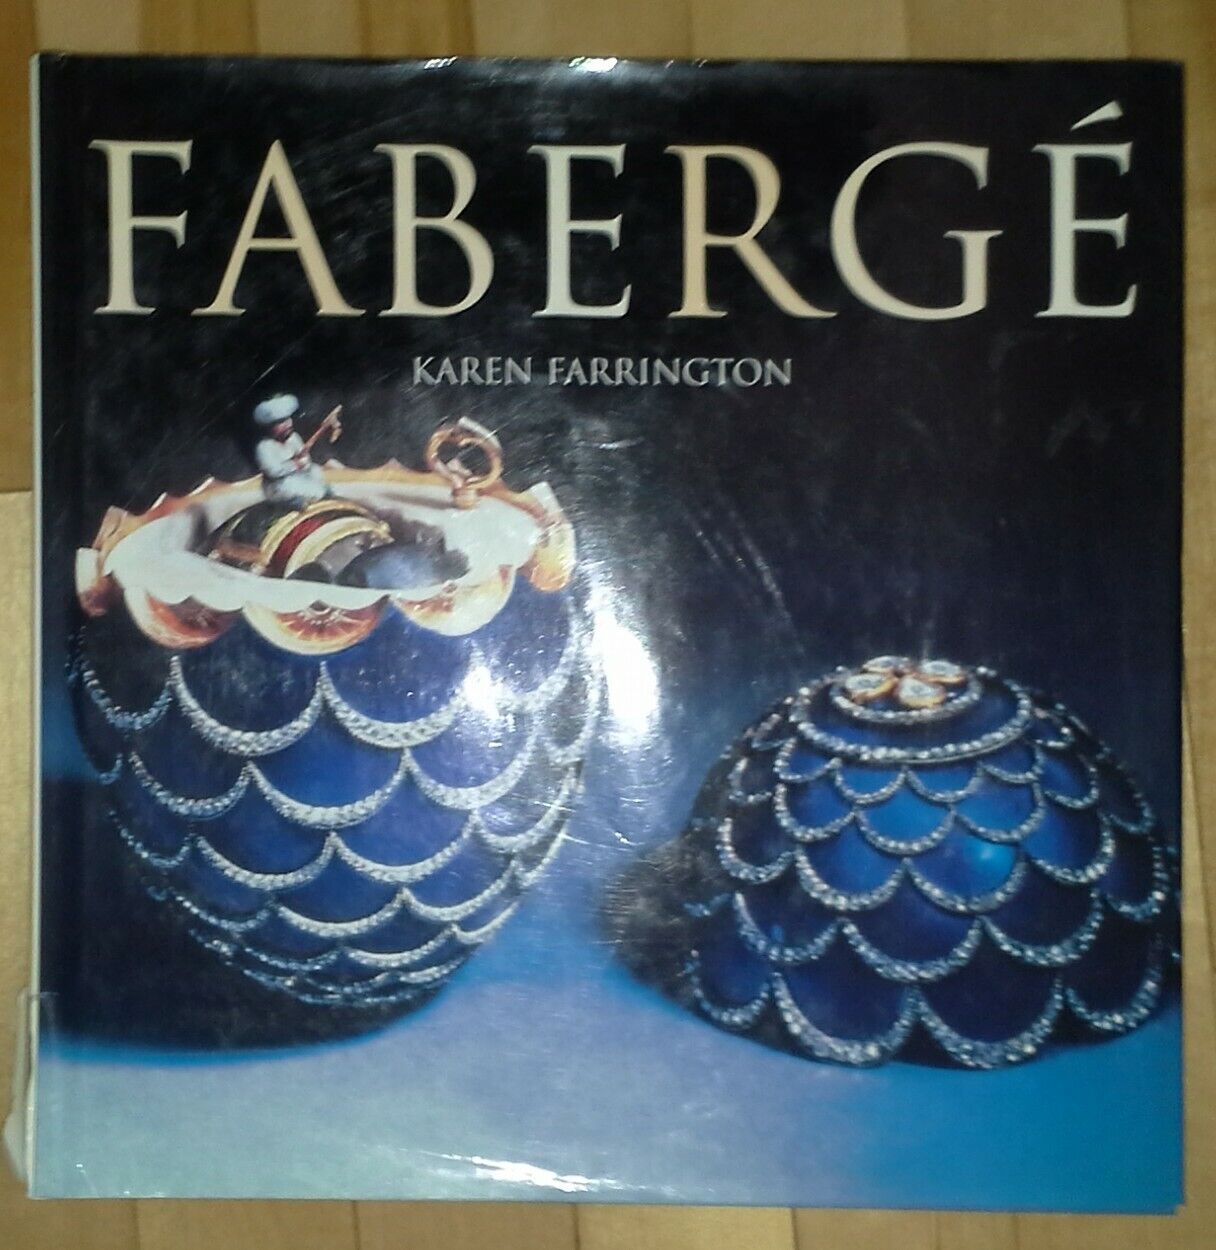 Huge Collection of FABERGE Decorative Arts. Amazing Photos of Treasures